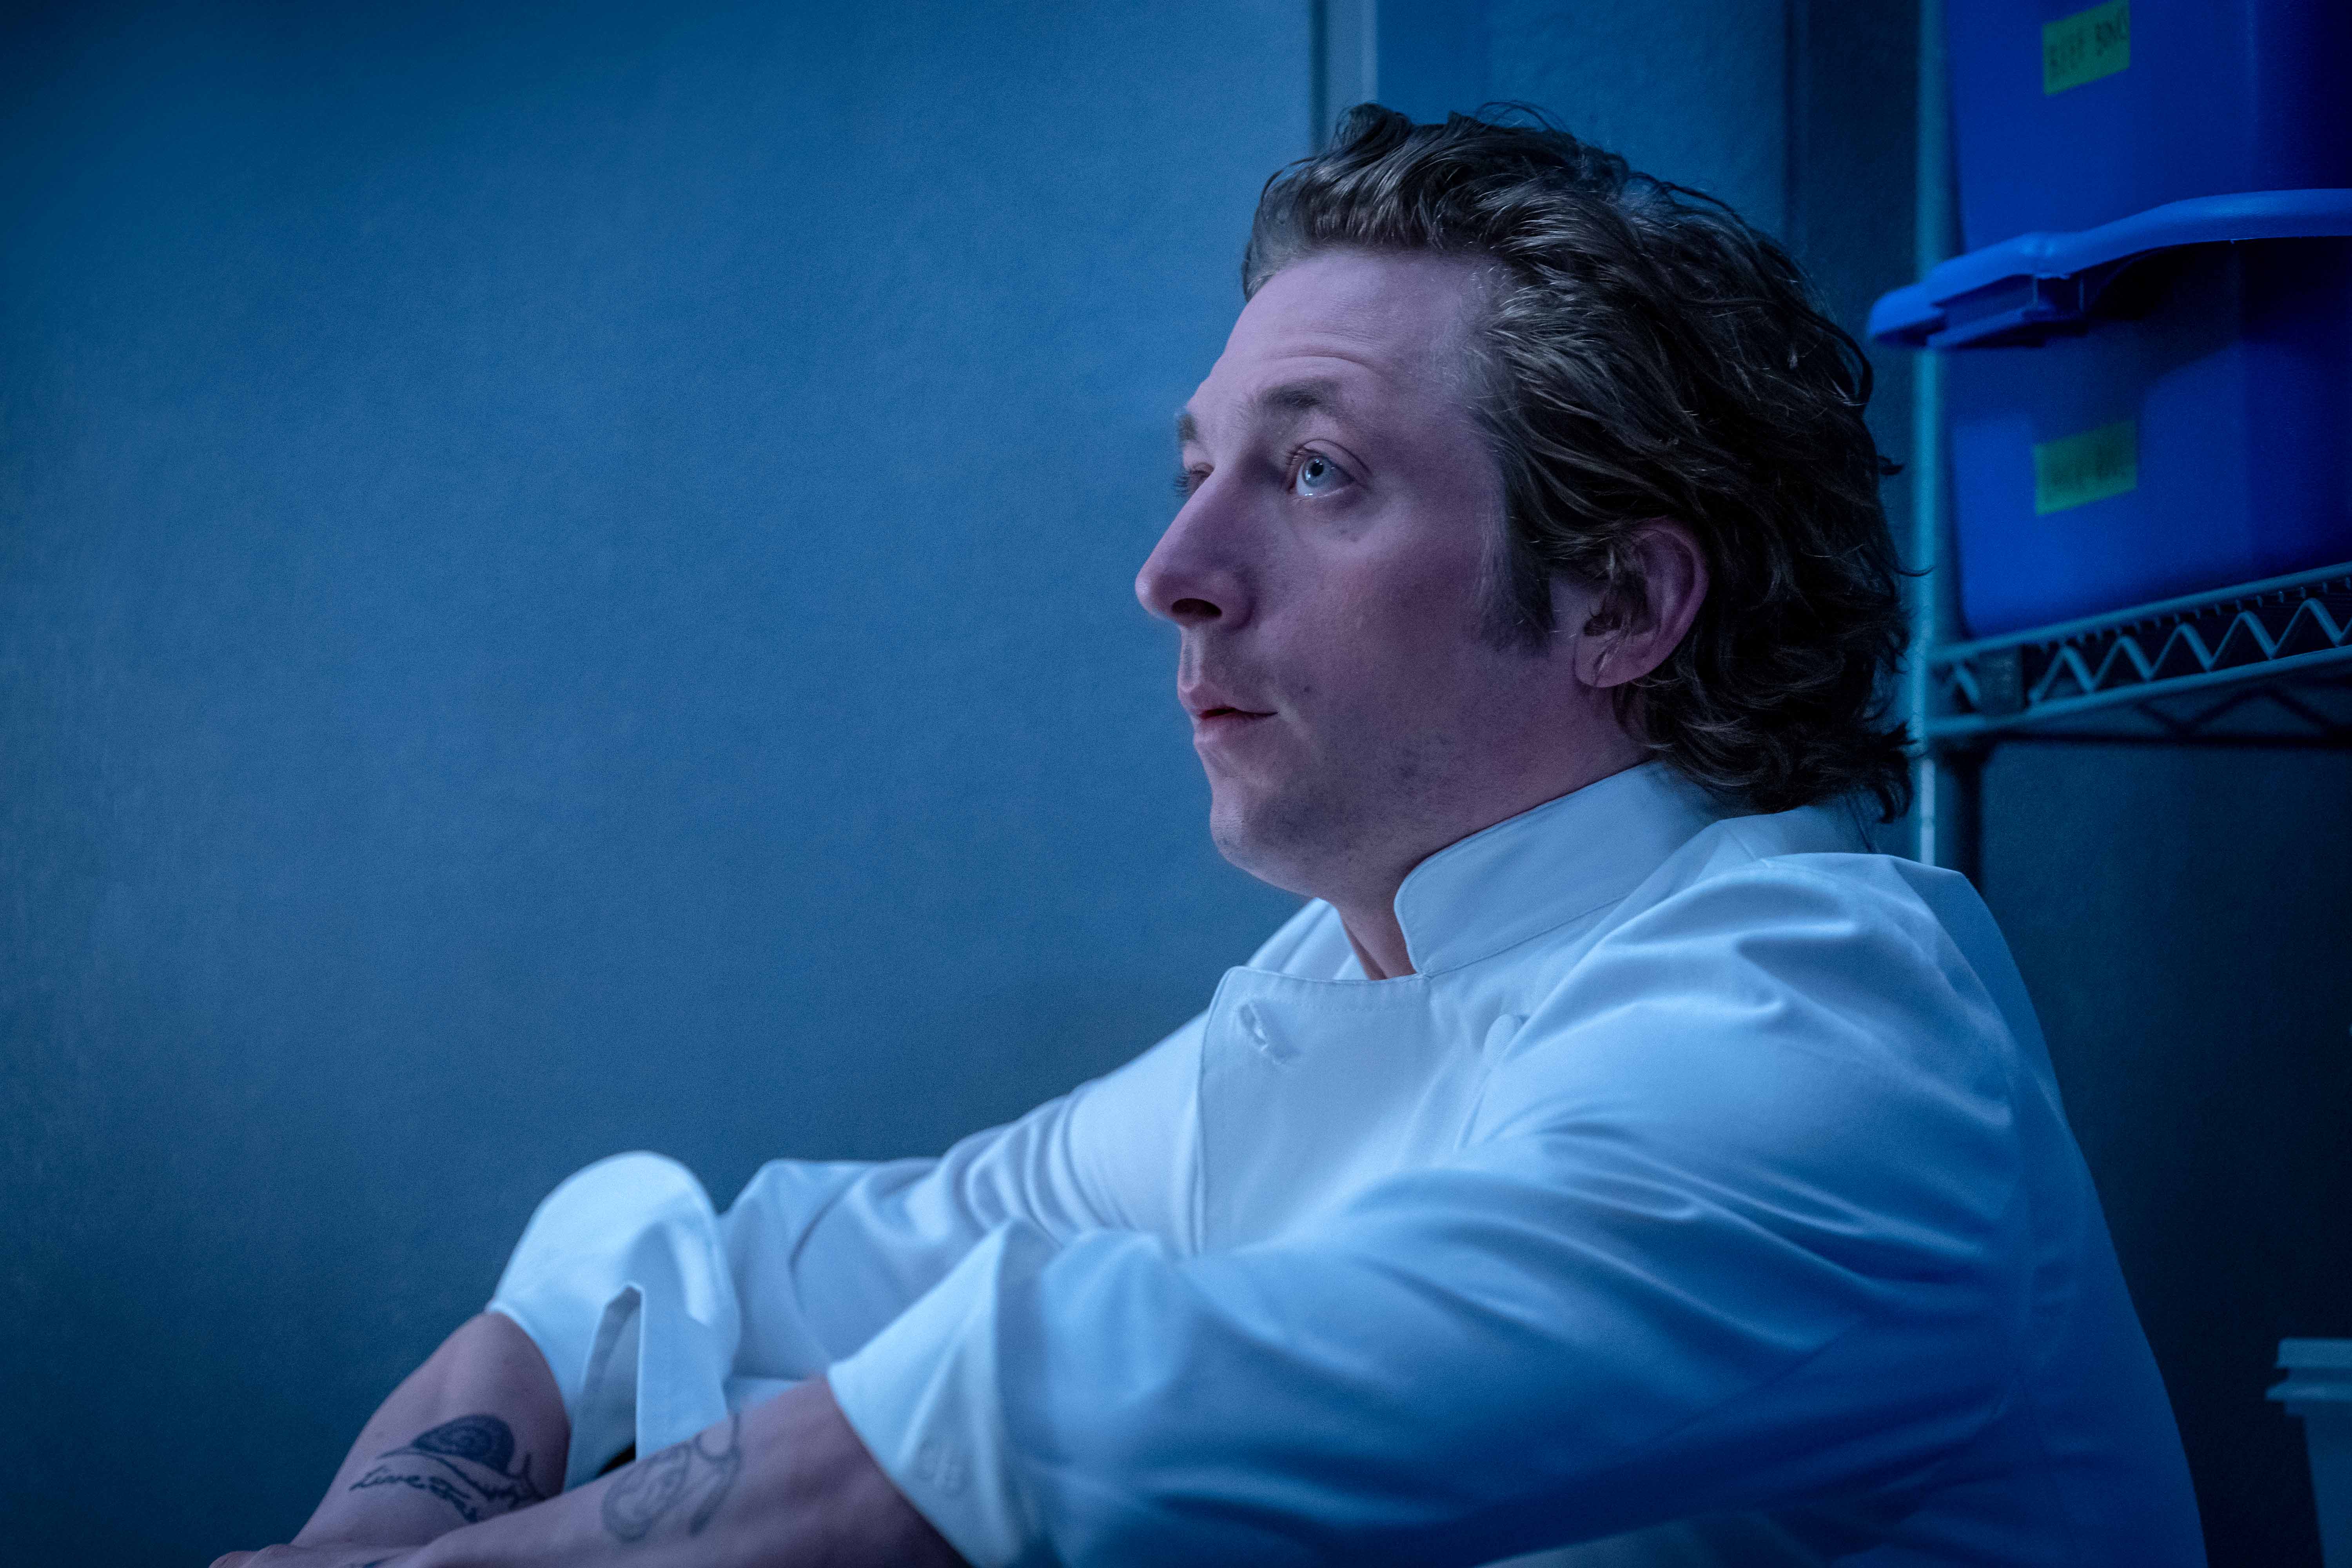 Jeremy Allen White as Carmine “Carmy” Berzatto in “The Bear,” sits in a walk-in refrigerator in front of milk crates.